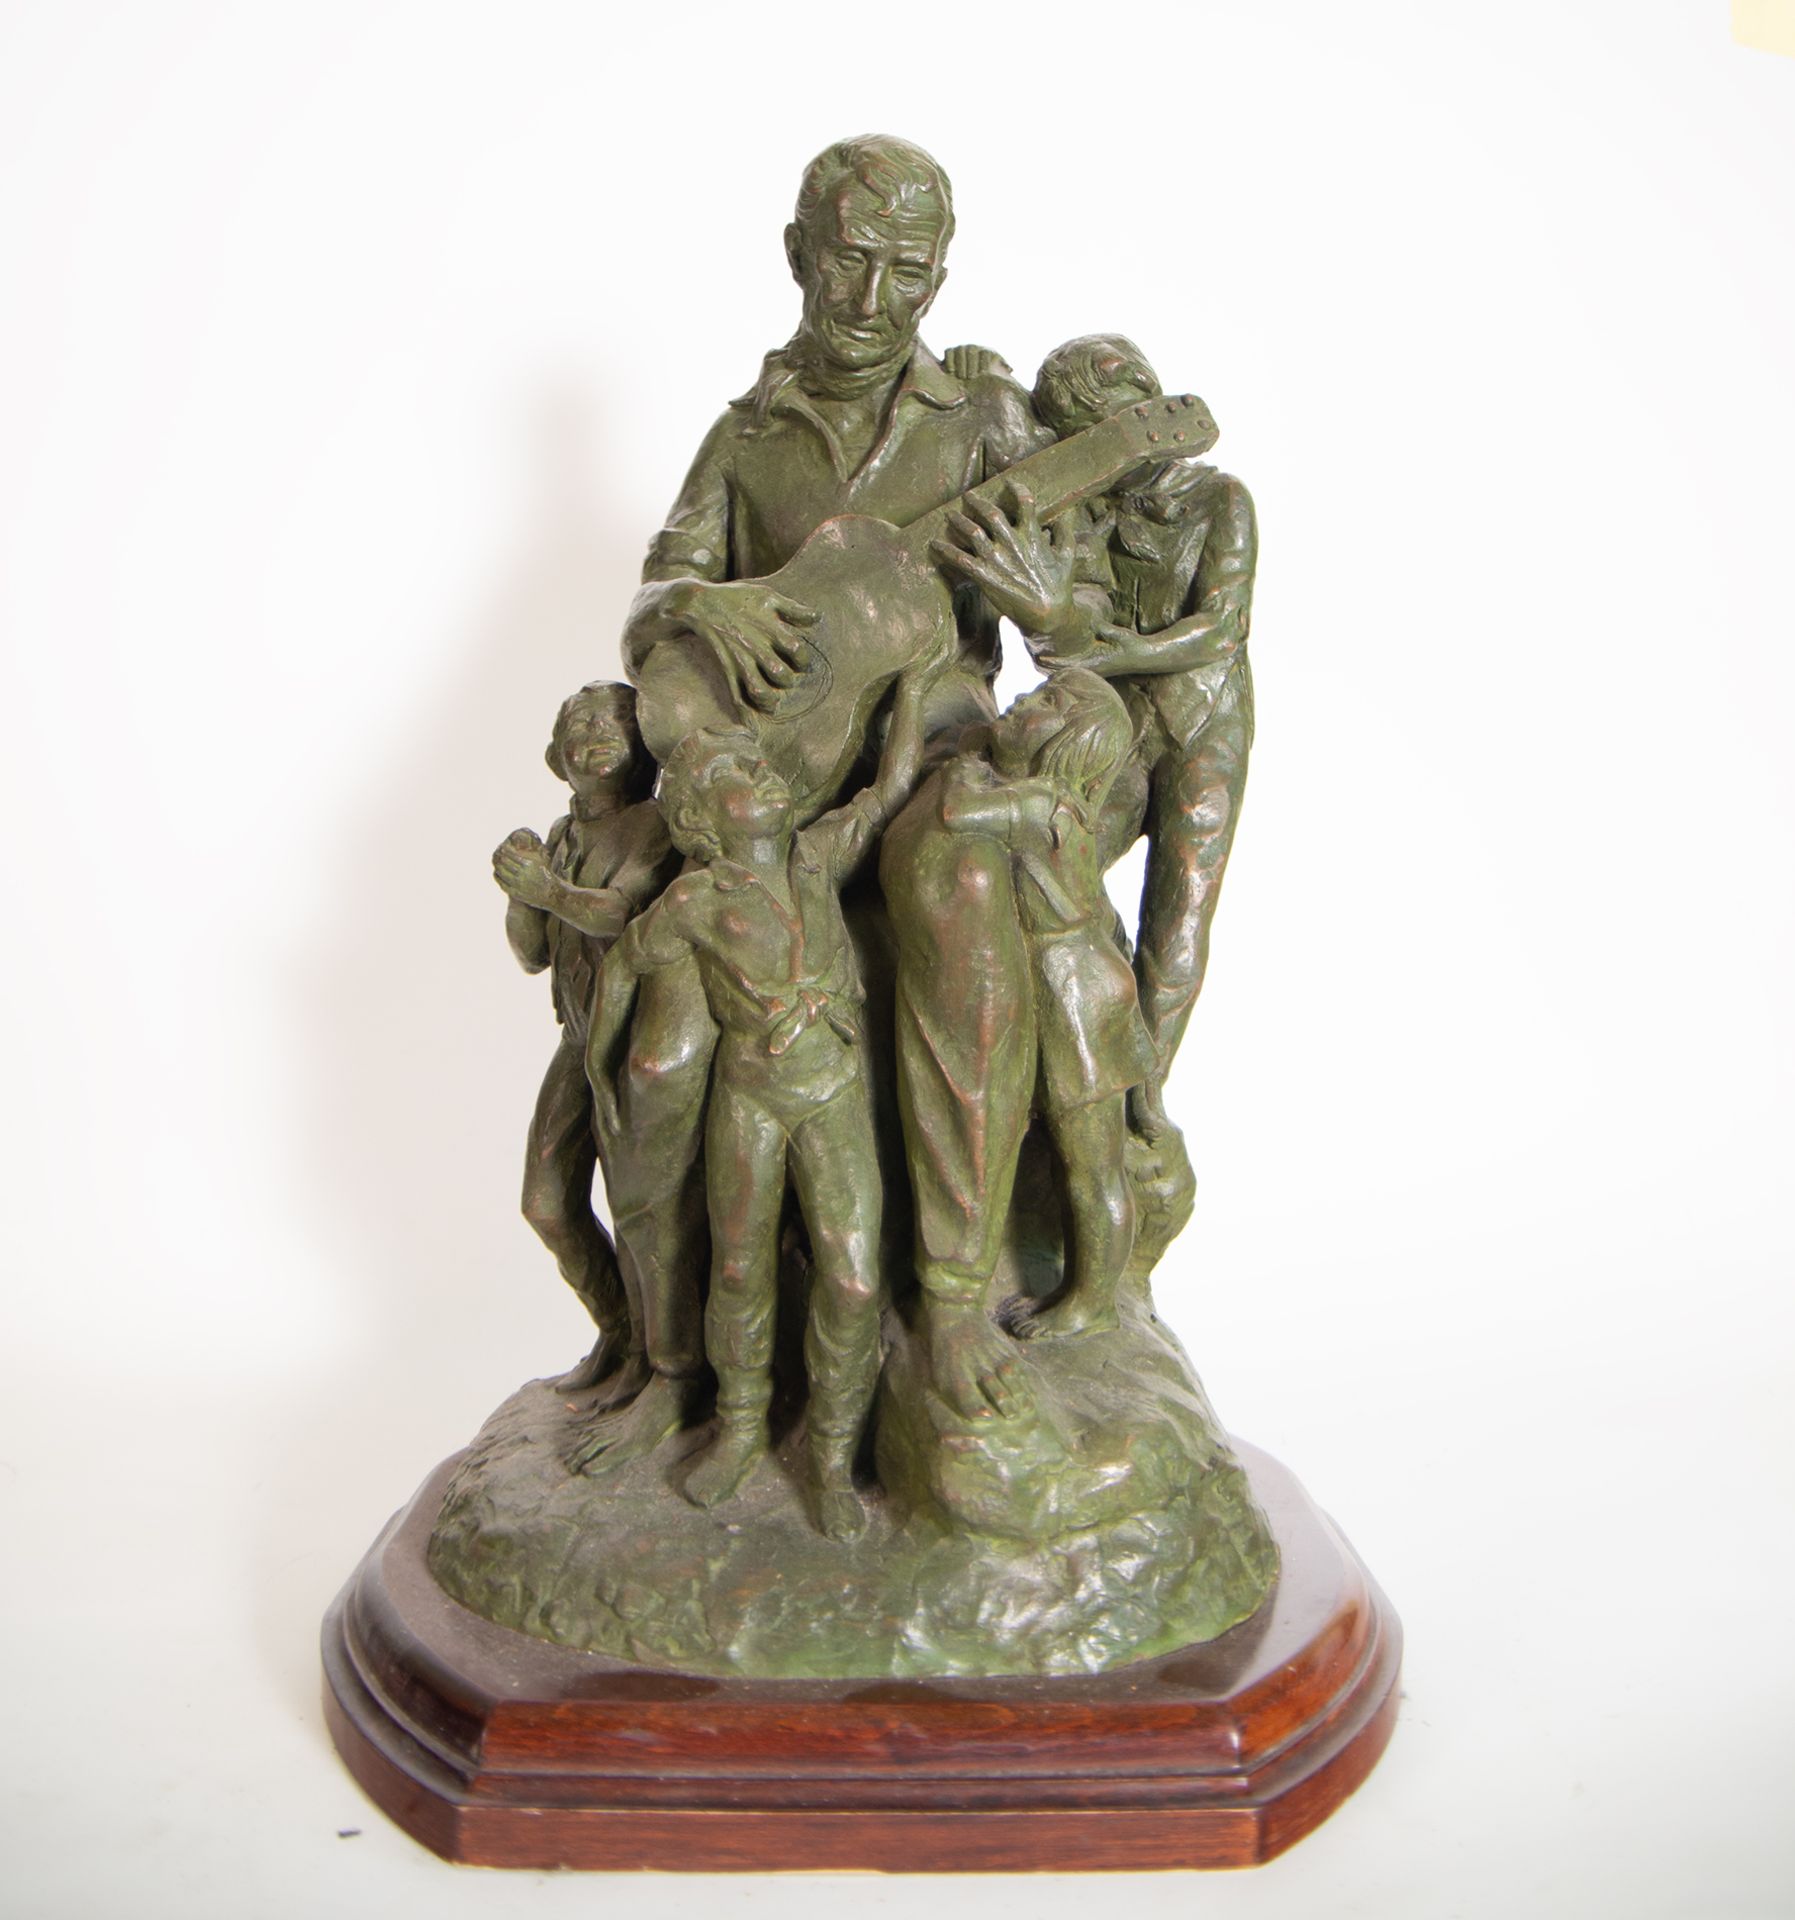 "The Music Lesson", sculptural group in patinated bronze with a wooden base, 20th century